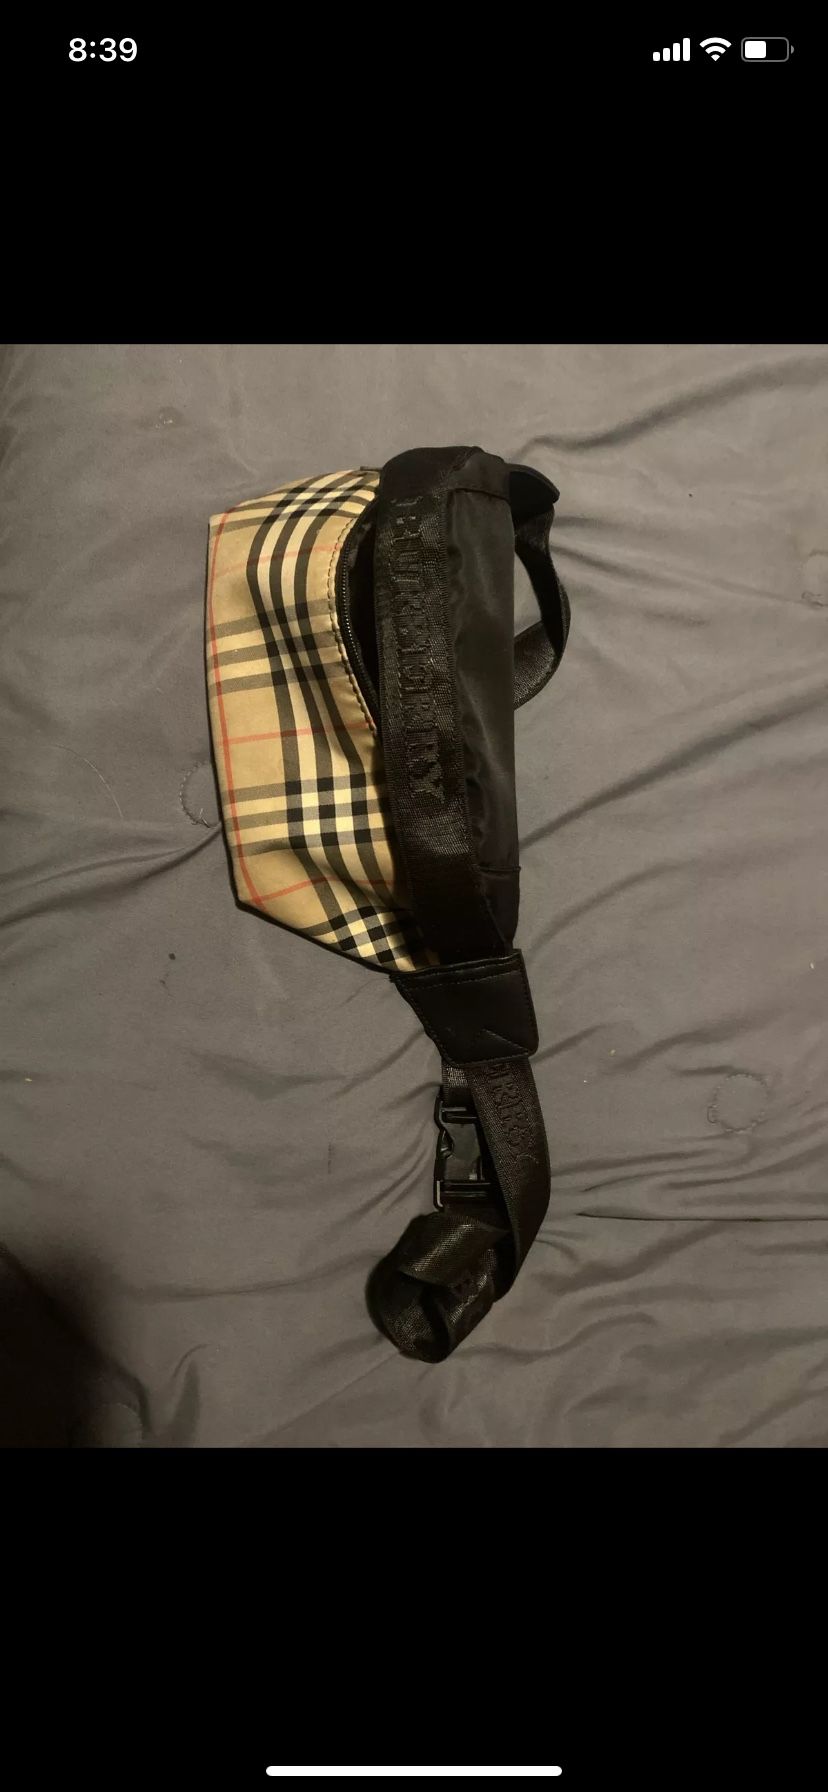 Burberry Fanny pack 